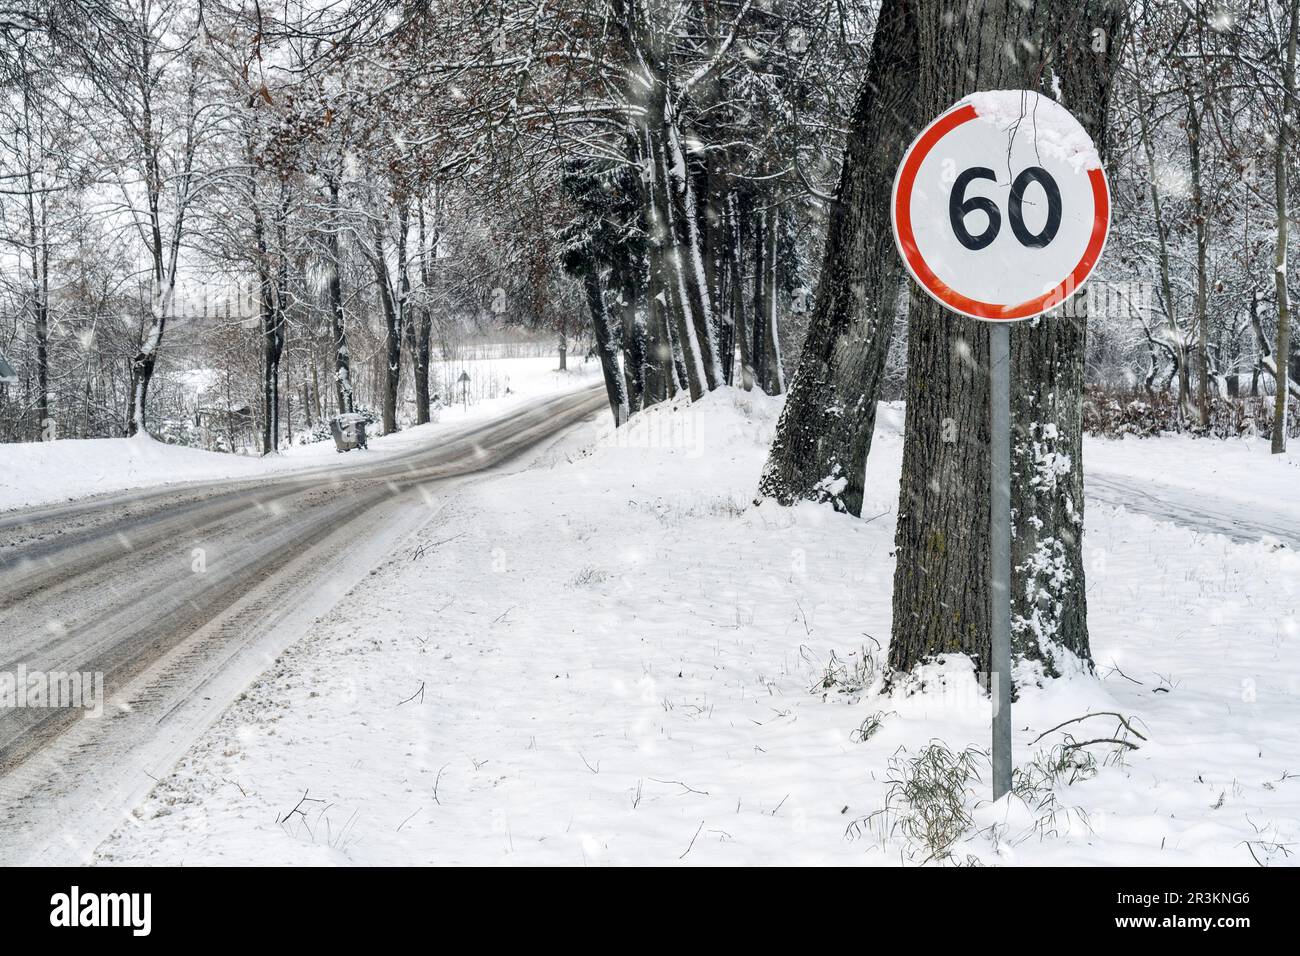 60 km/h speed limit road sign in snowy road Stock Photo